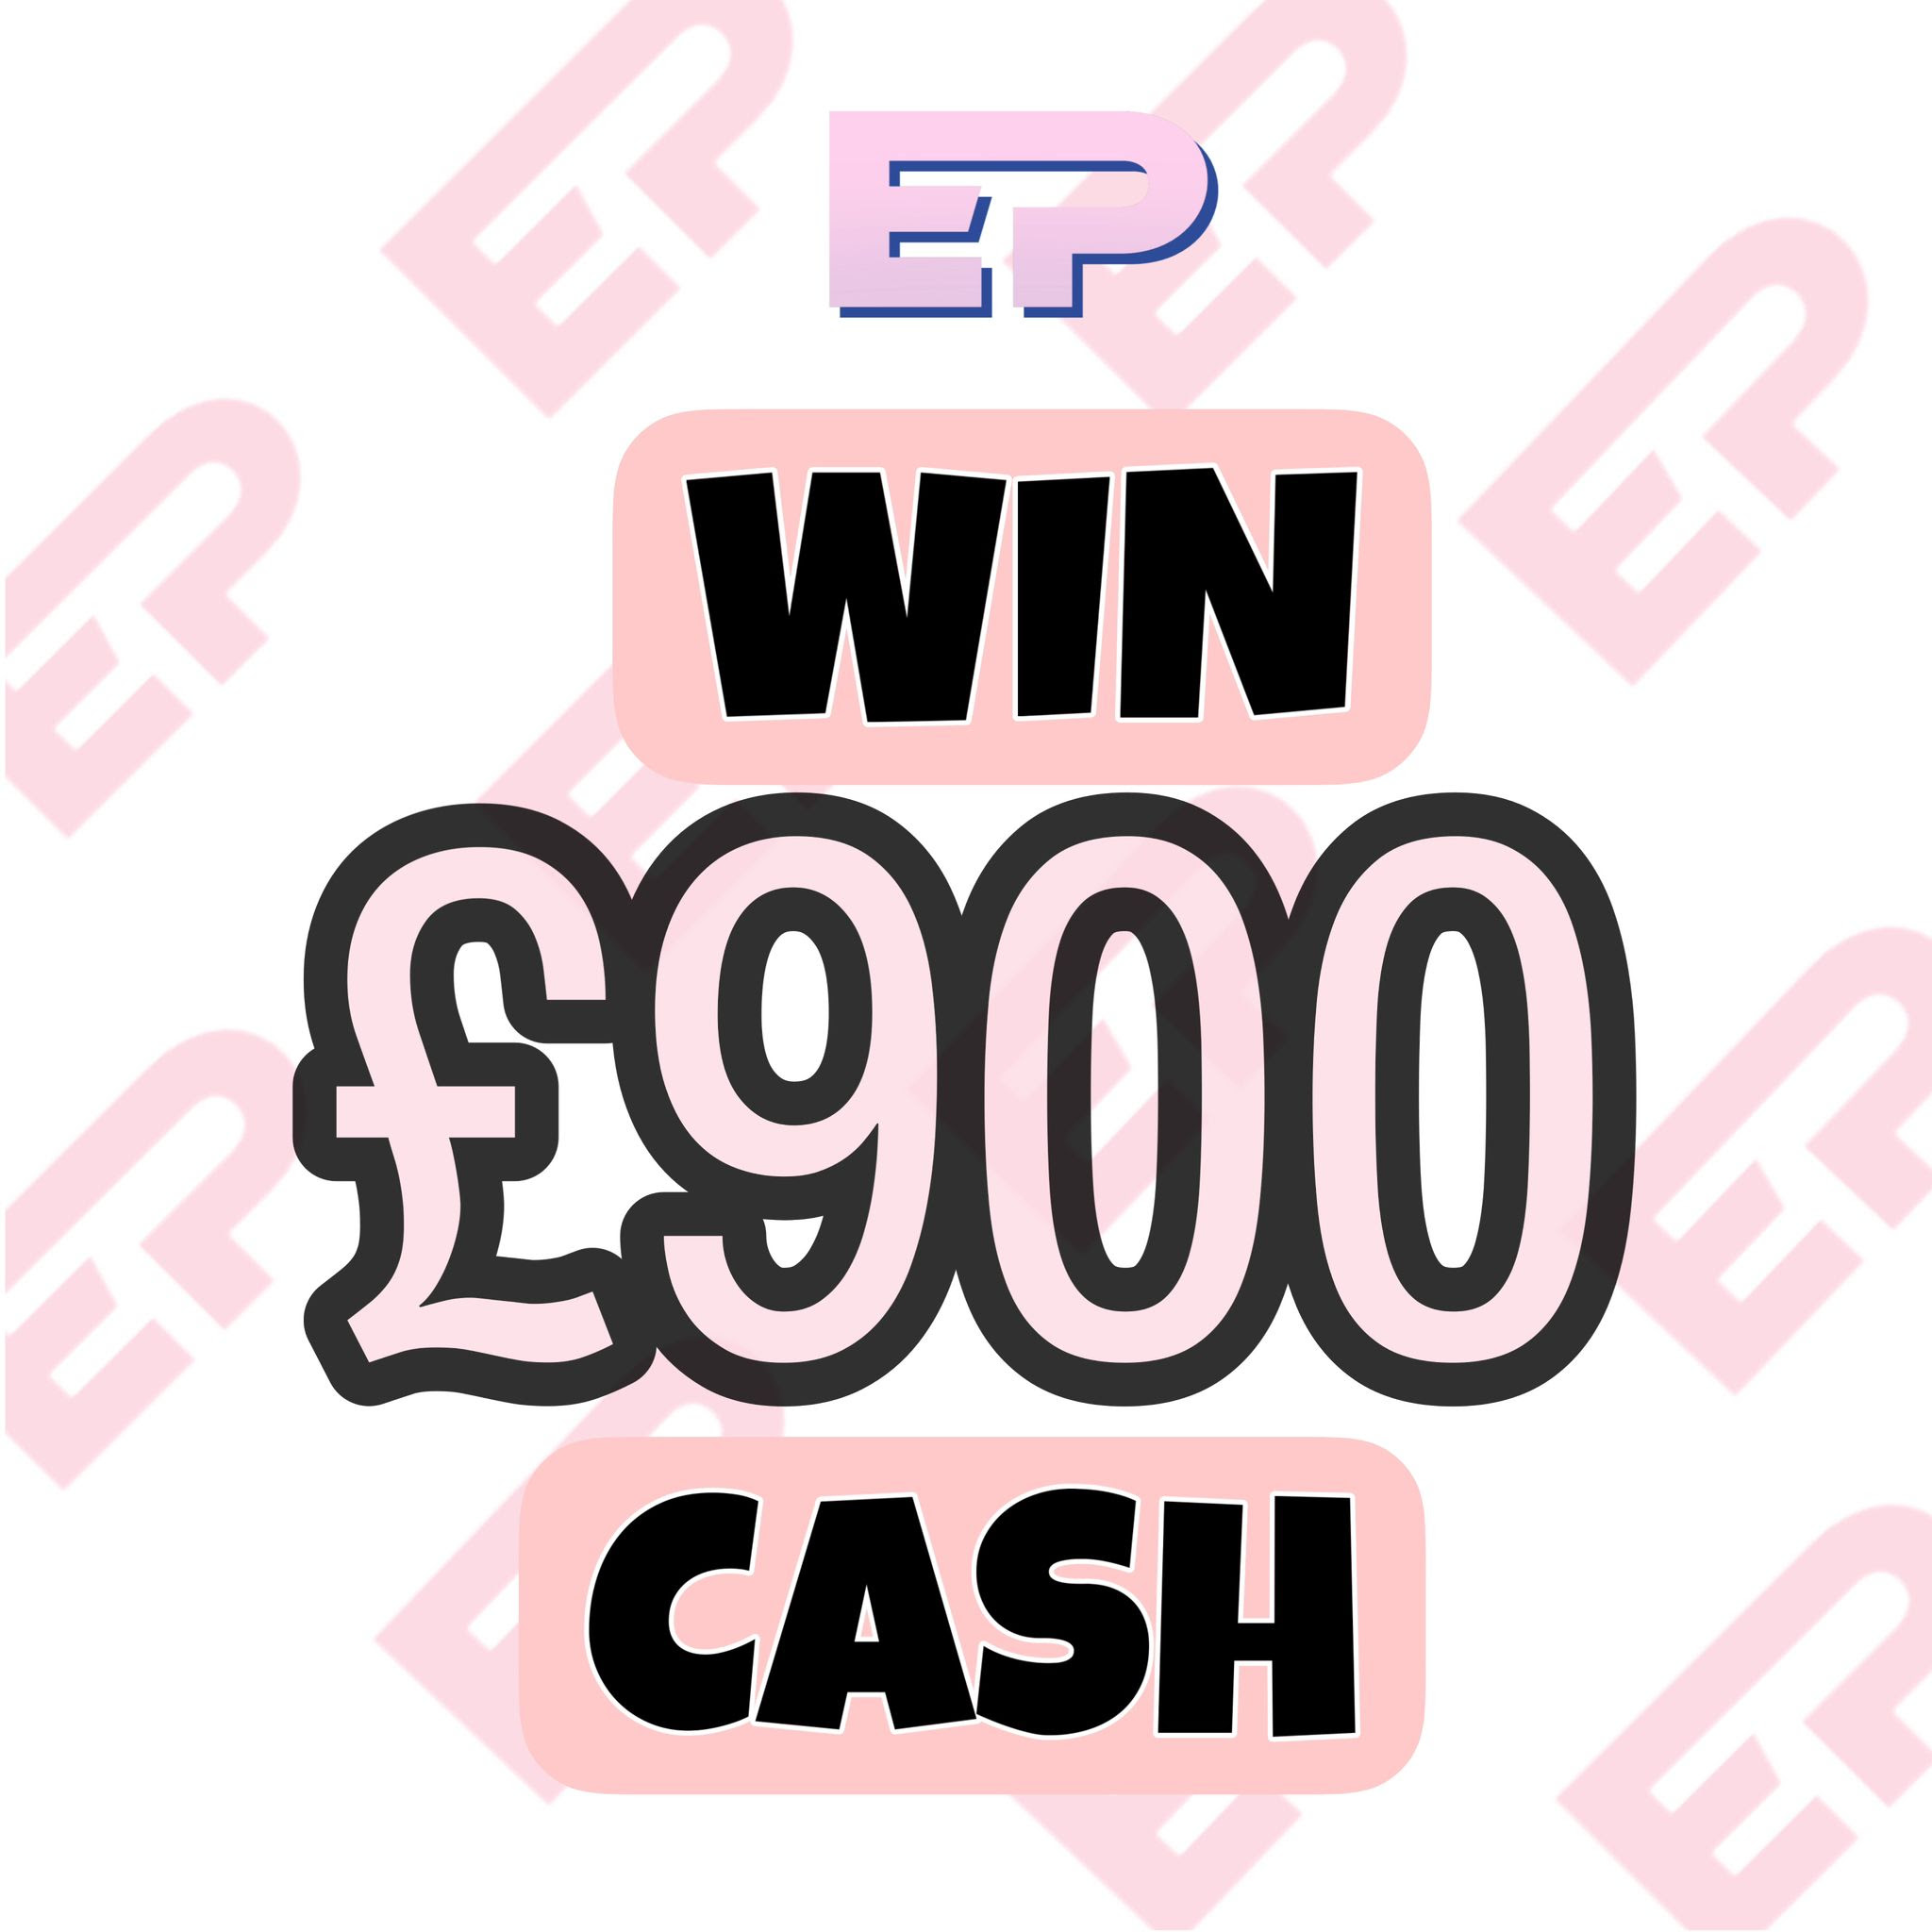 Image of WIN £900 CASH FOR JUST 90p!